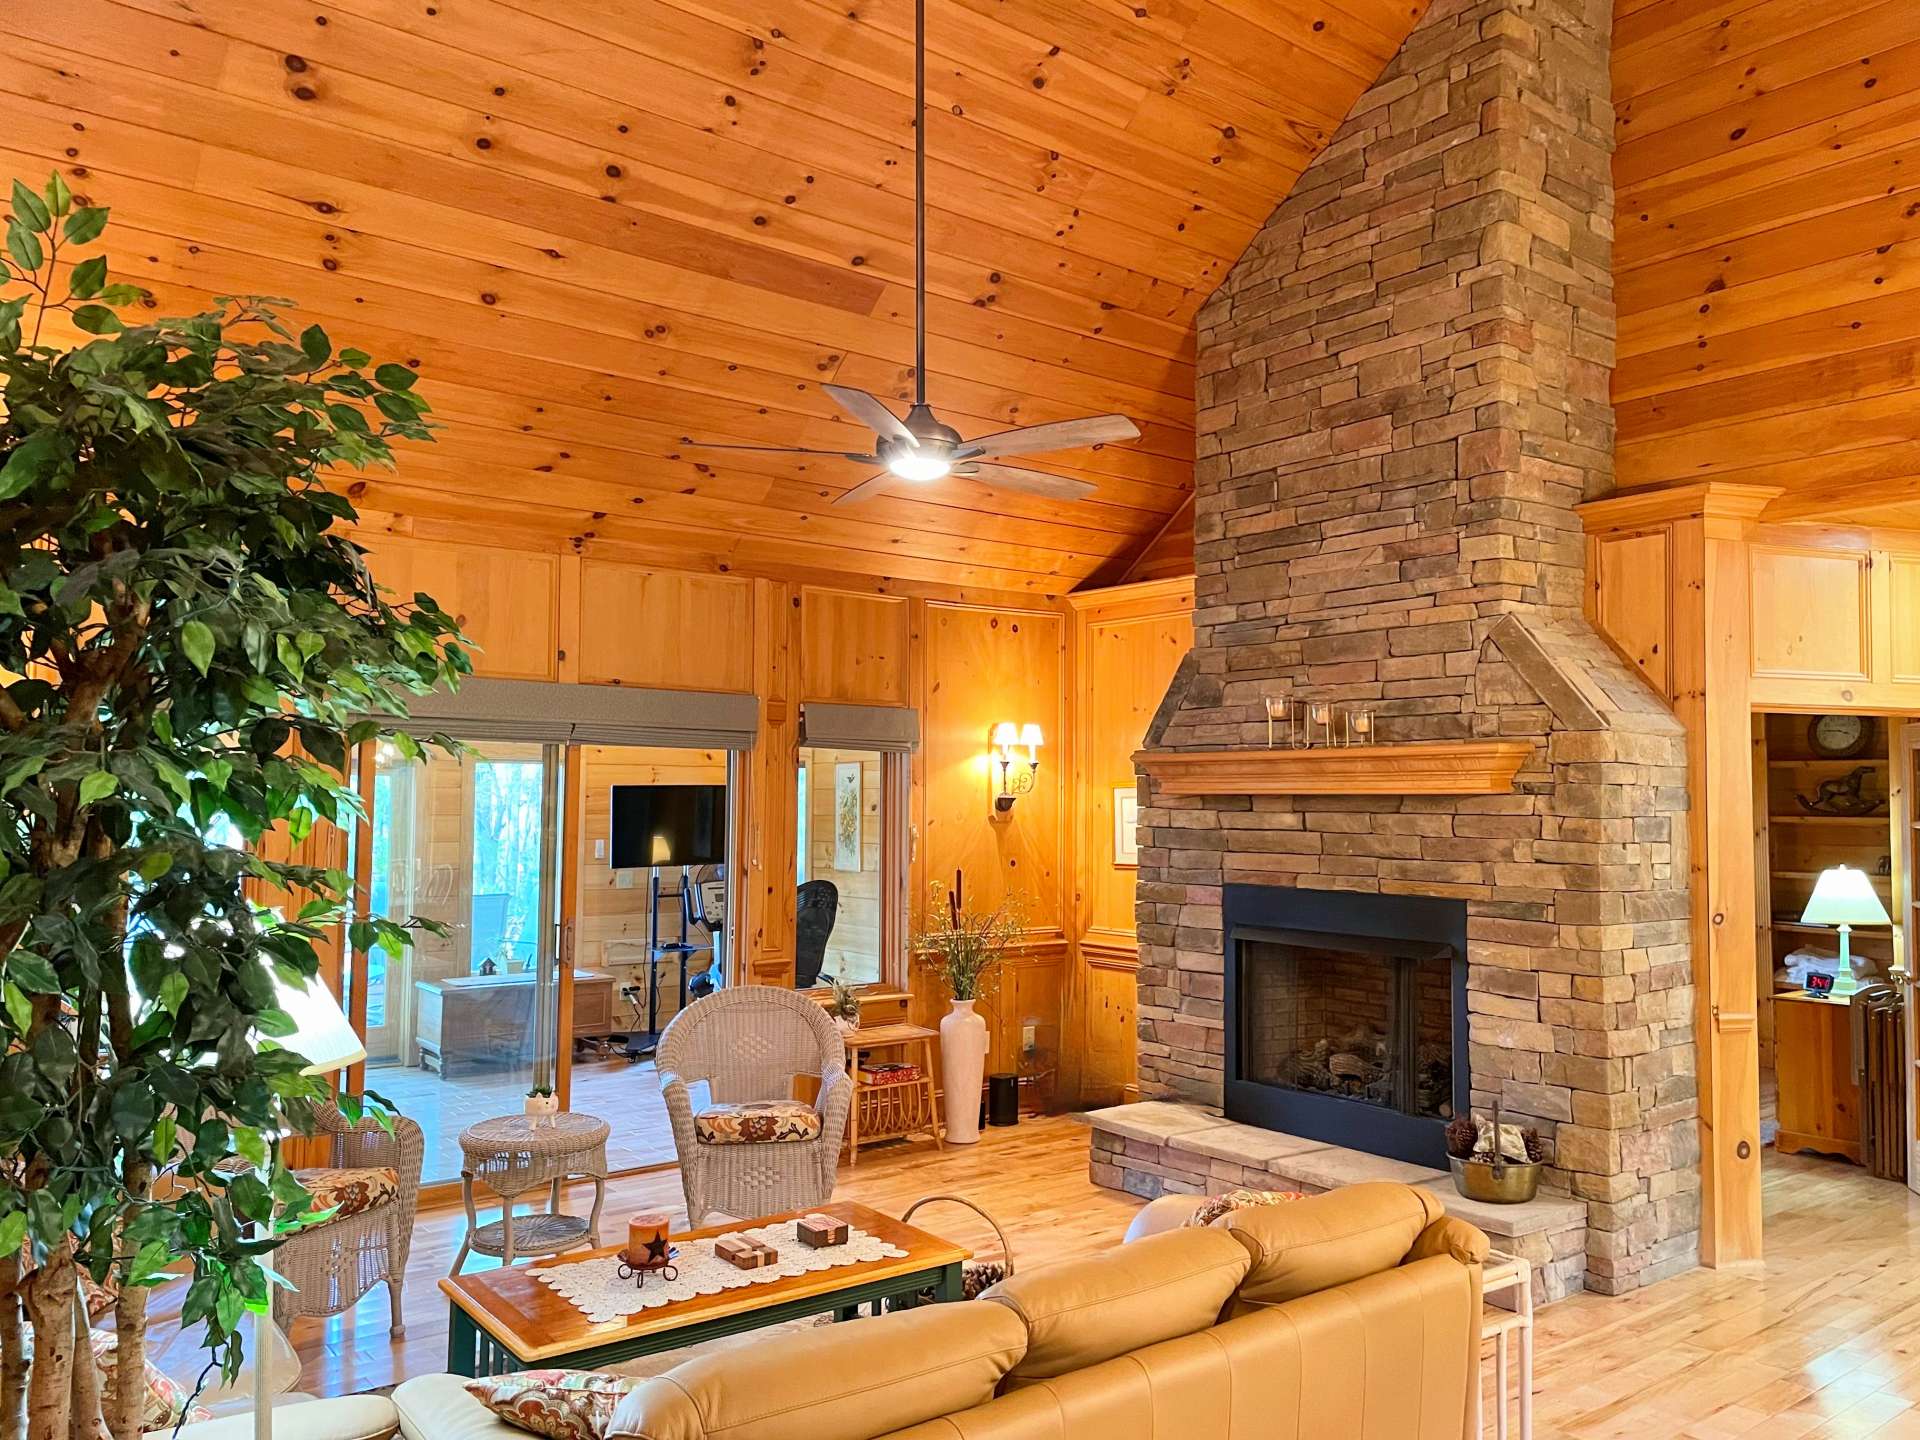 Living area with floor to ceiling stone fireplace with gas logs to warm you on cold nights!